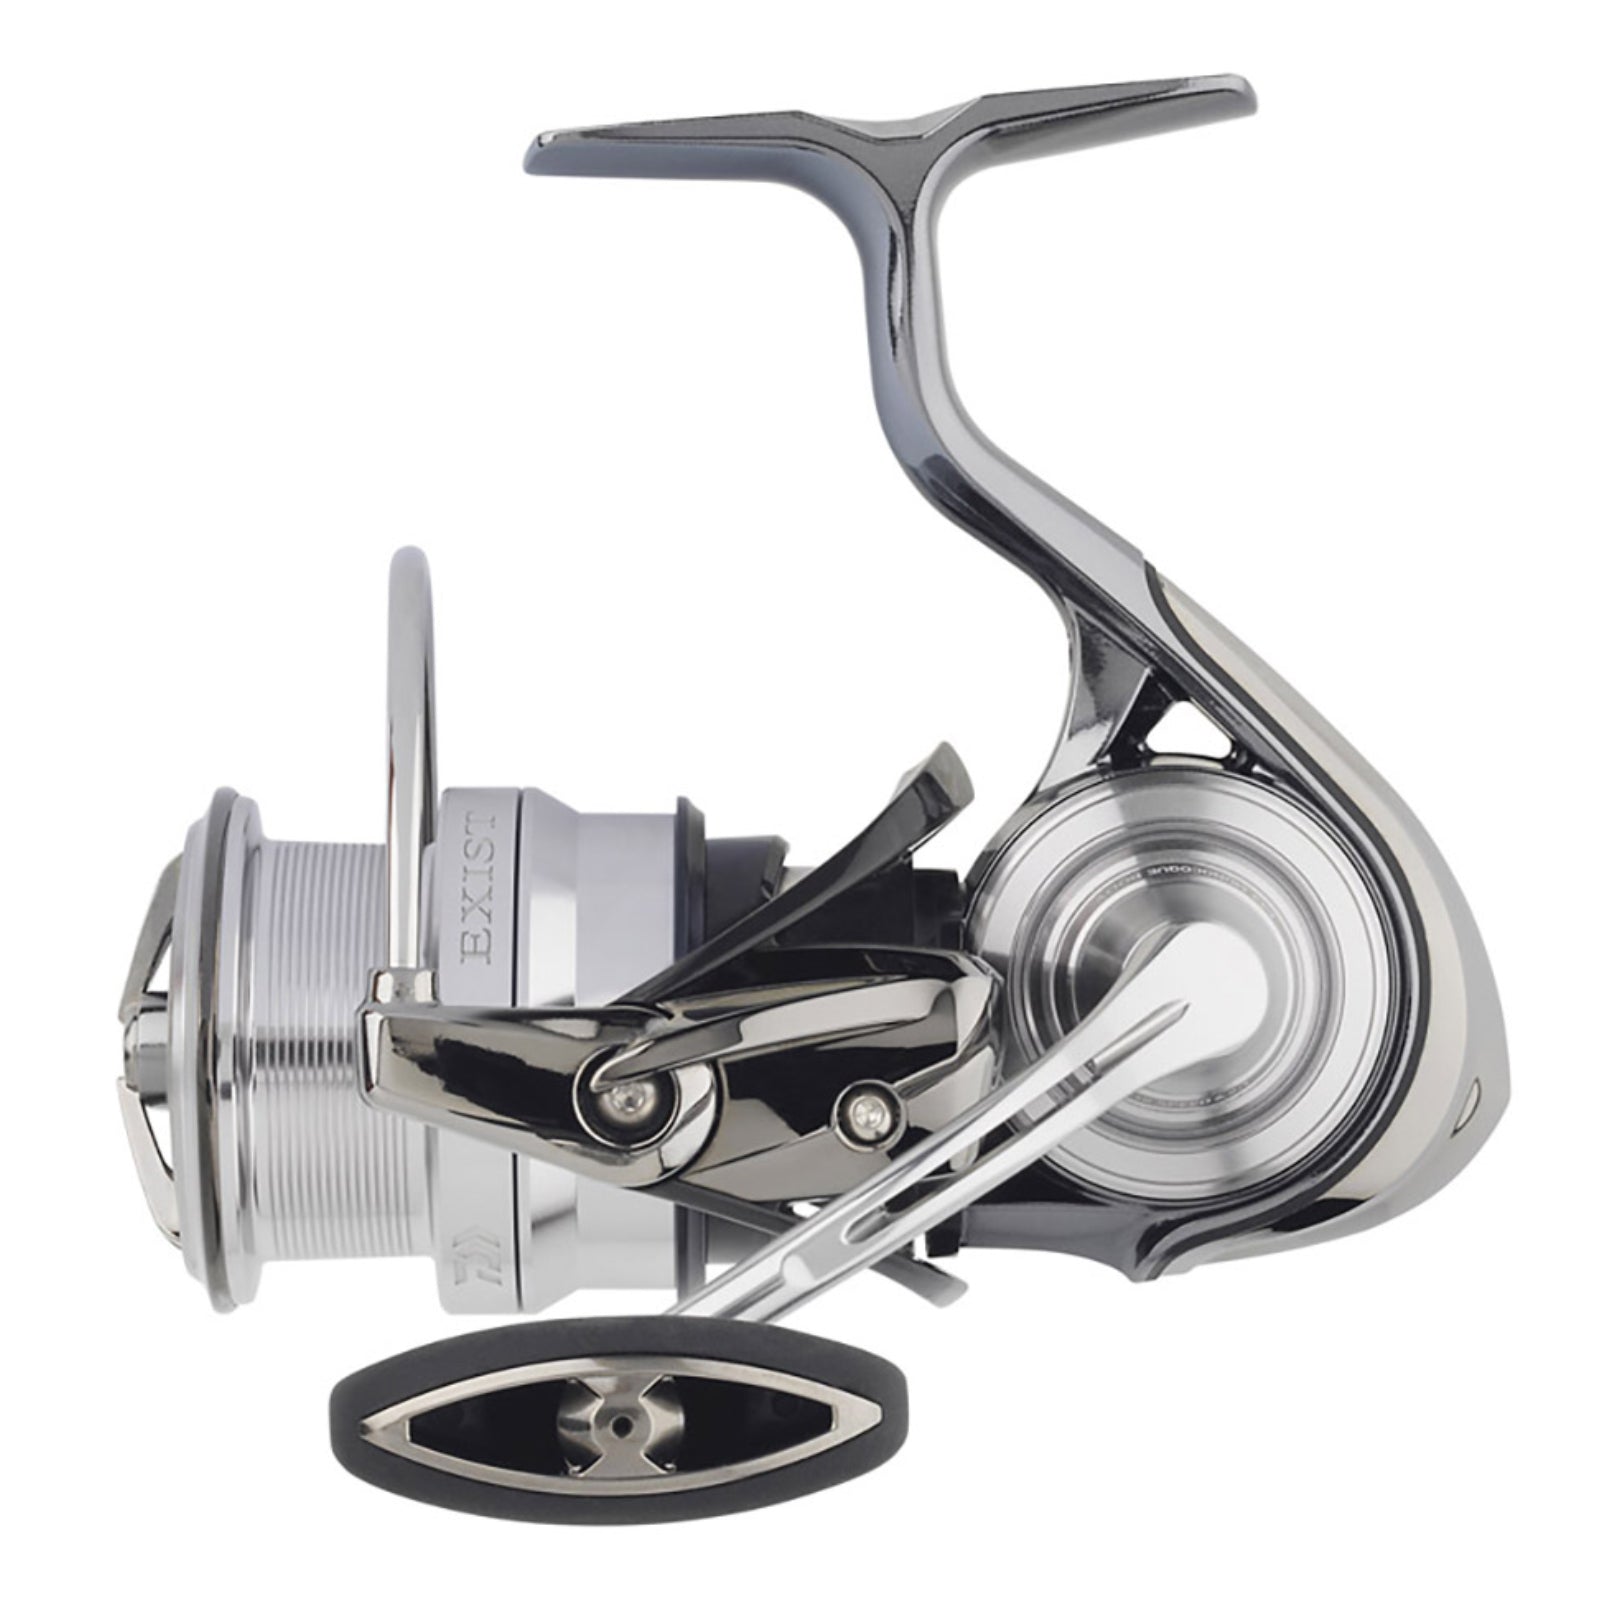 Daiwa 18 Exist - Compleat Angler Nedlands Pro Tackle